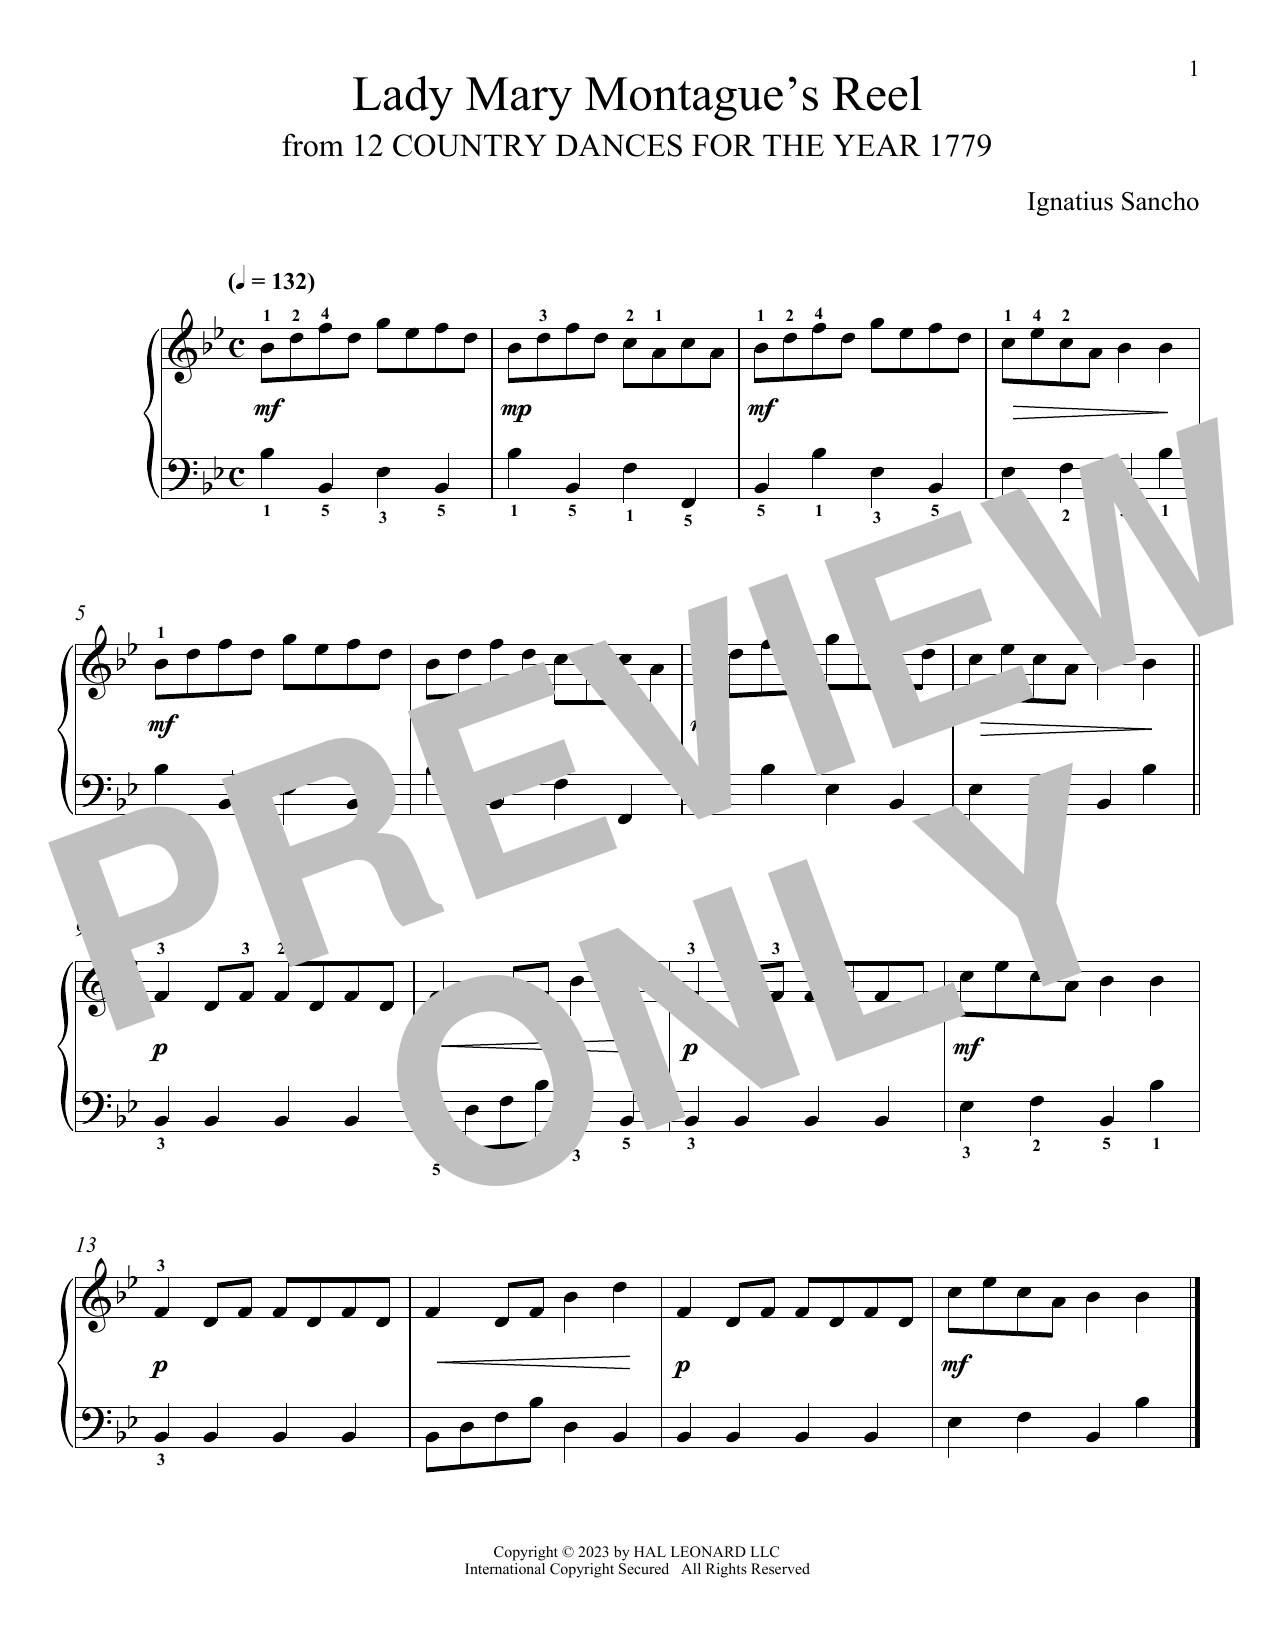 Download Ignatius Sancho Lady Mary Montague's Reel Sheet Music